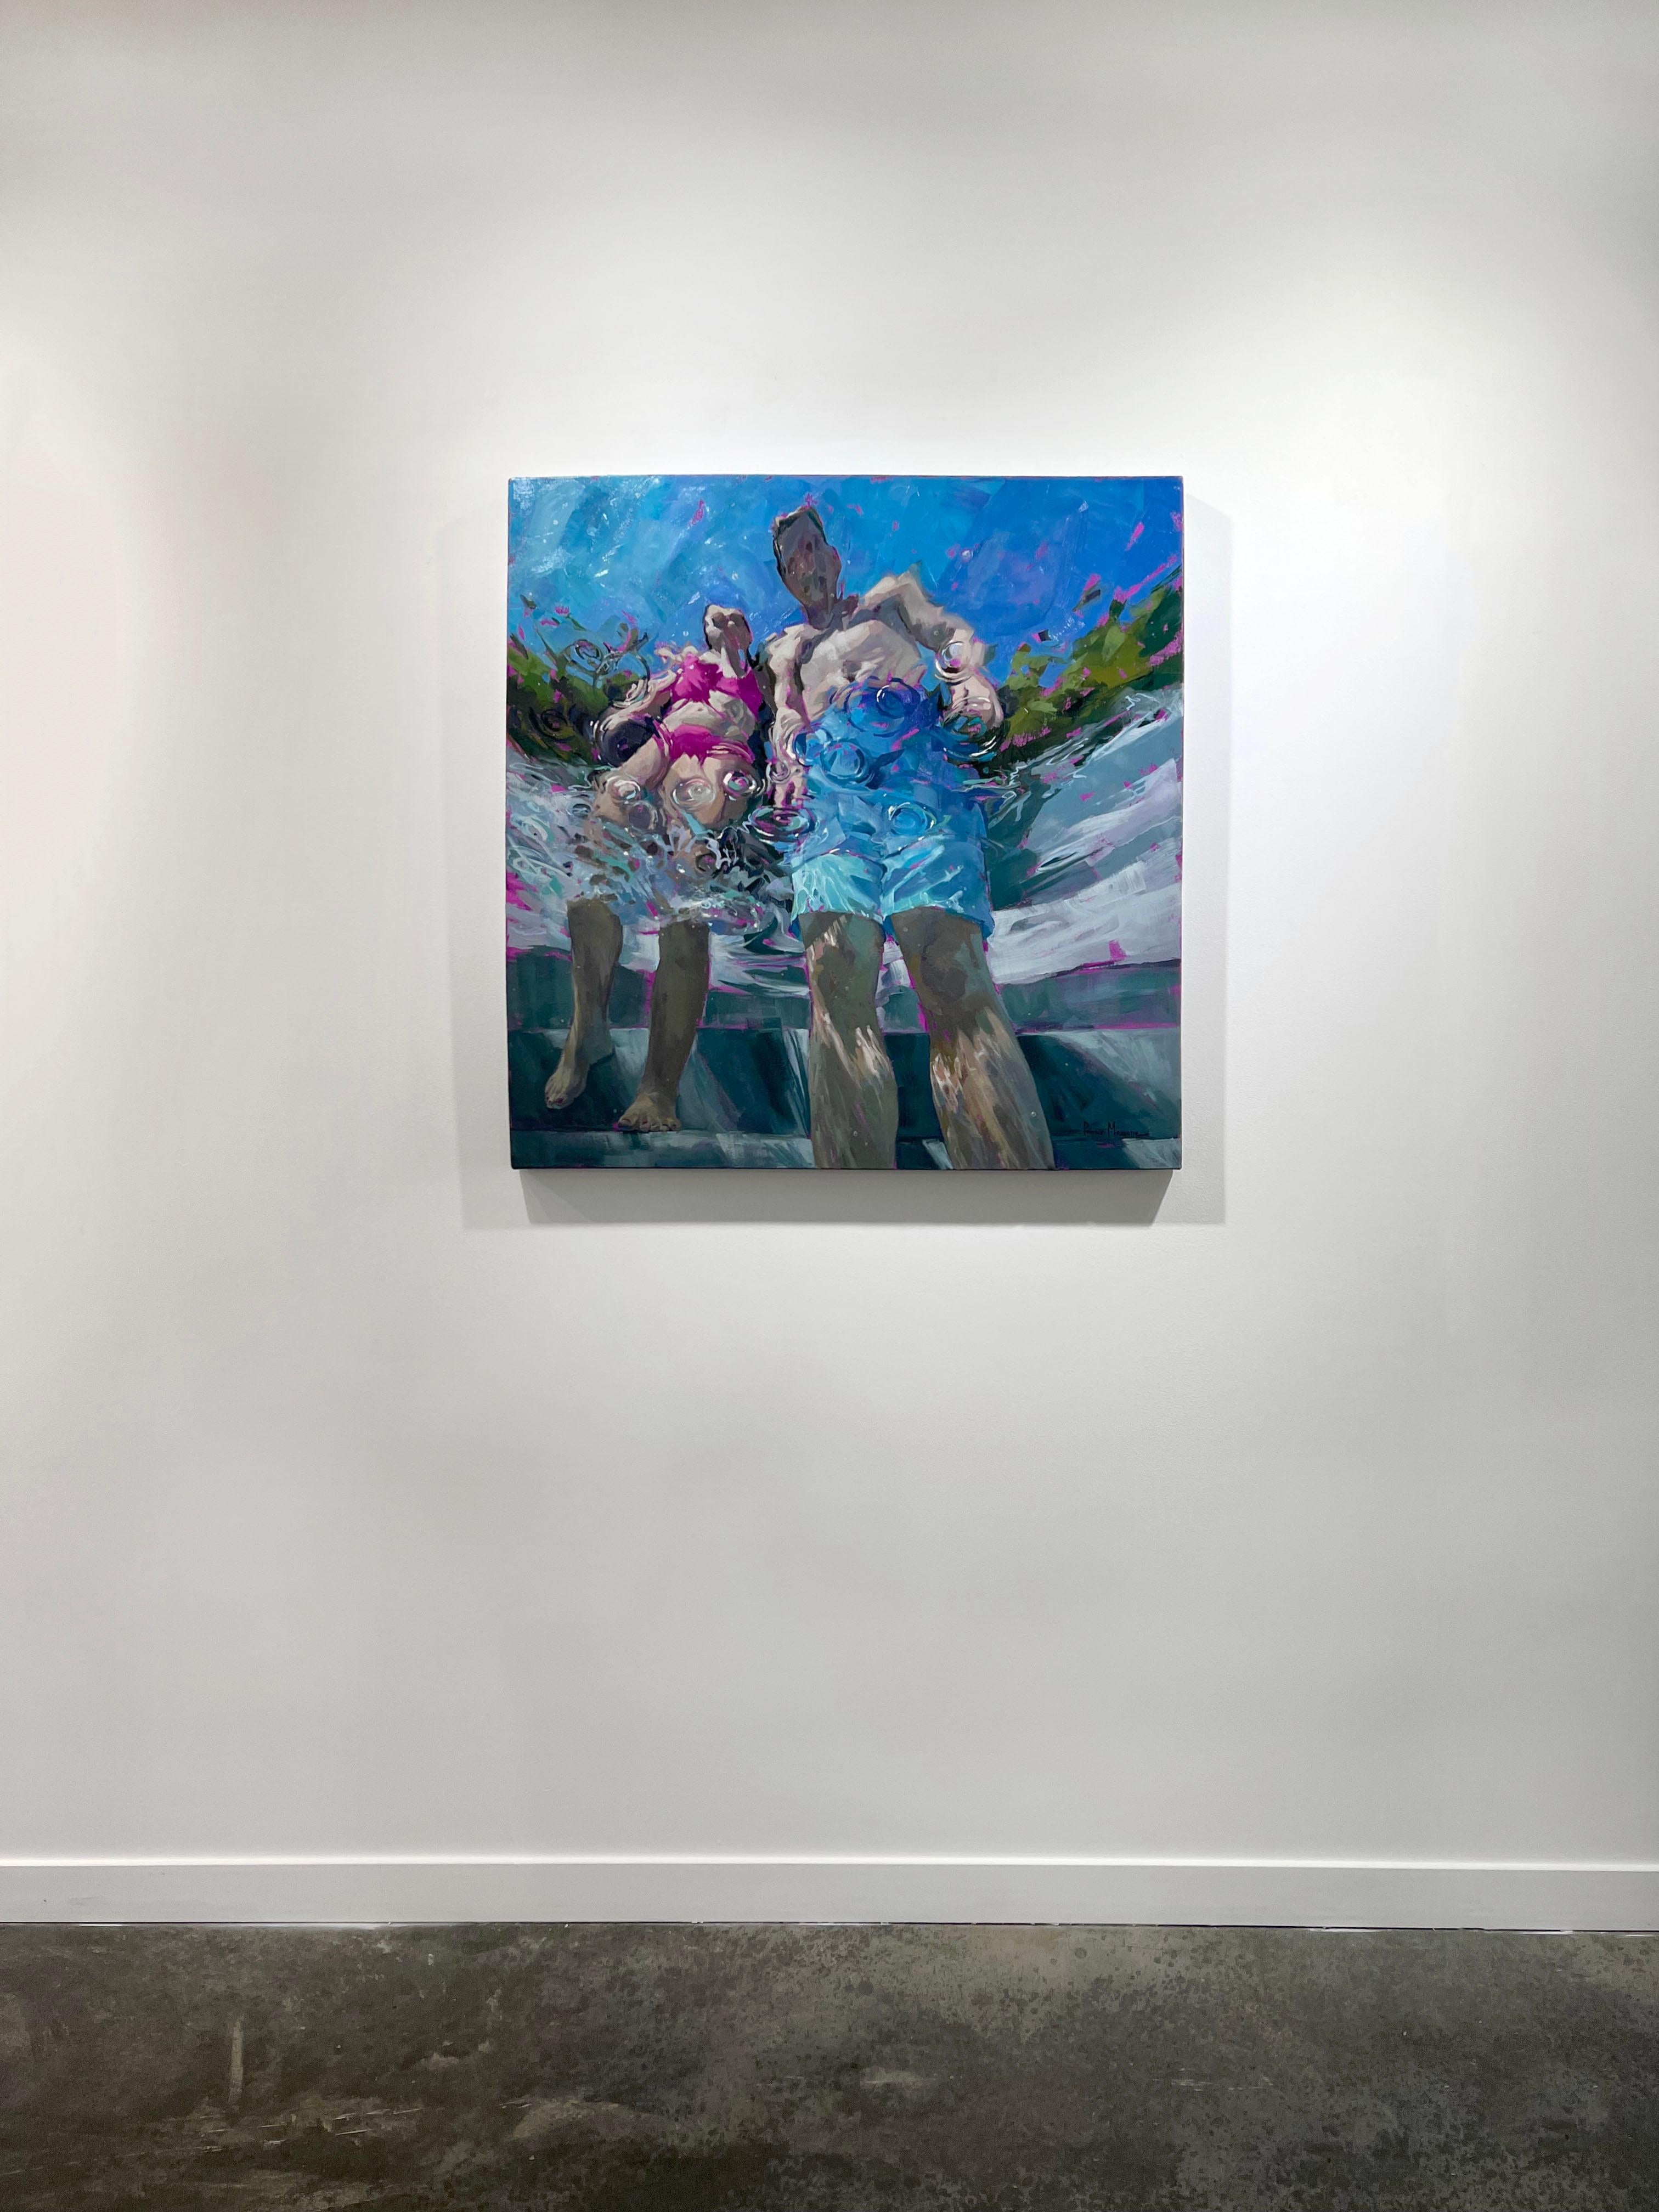 This abstract figural painting by Michele Poirier-Mozzone captures two children wearing brightly colored bathing suits, standing on pool steps from a viewpoint beneath the surface of the water. Sunlight is refracted in the water, abstracting the